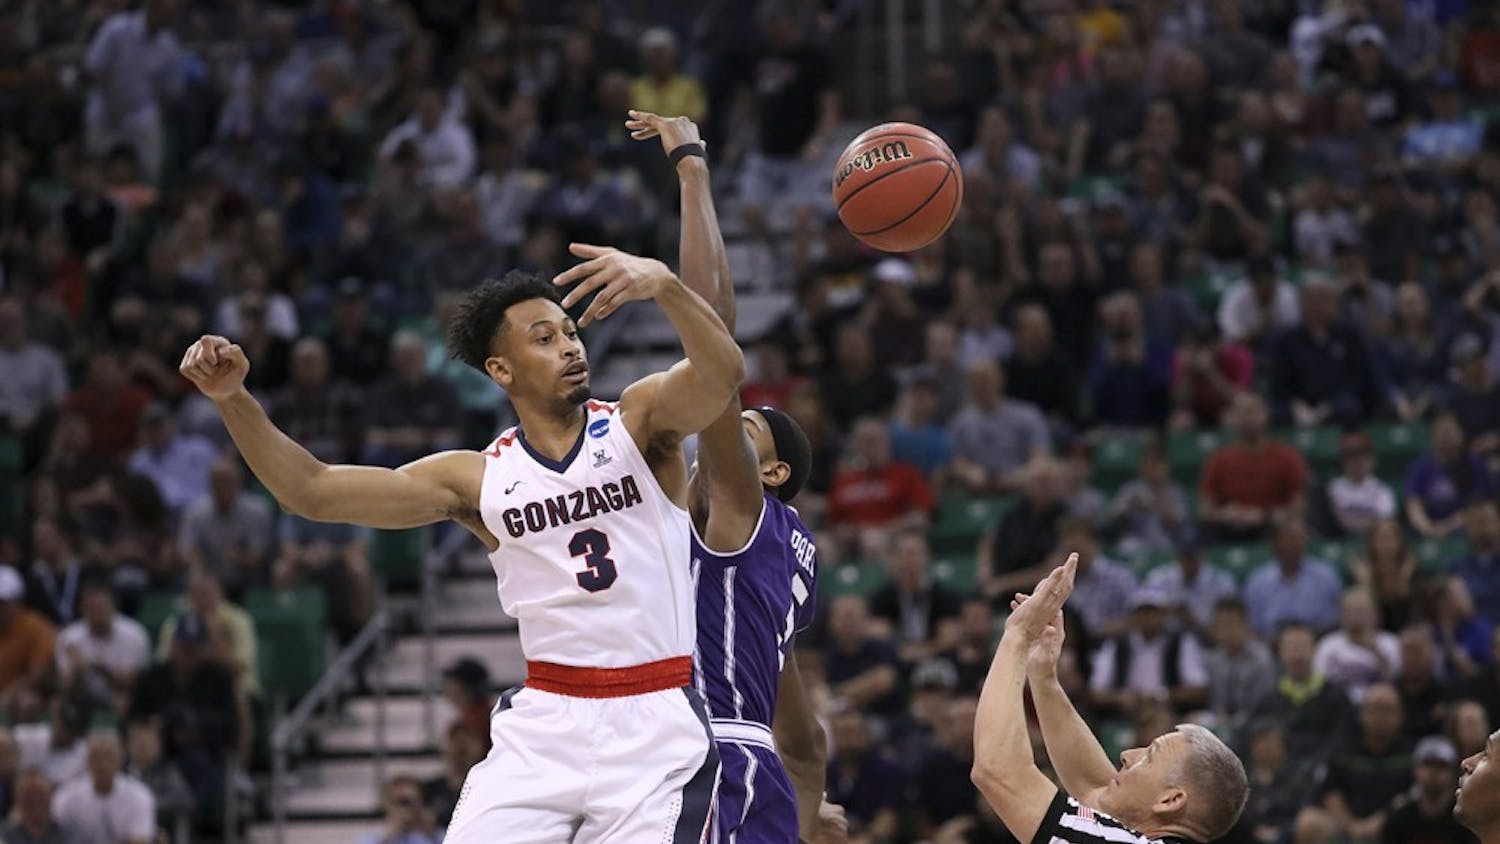 Gonzaga&apos;s Johnathan Williams (3) gets the tip-off over Northwestern&apos;s Dererk Pardon during the first half in the second round of the NCAA Tournament at Vivint Smart Home Arena in Salt Lake City on Saturday, March 18, 2017. Gonzaga advanced, 79-73. (Armando L. Sanchez/Chicago Tribune/TNS)